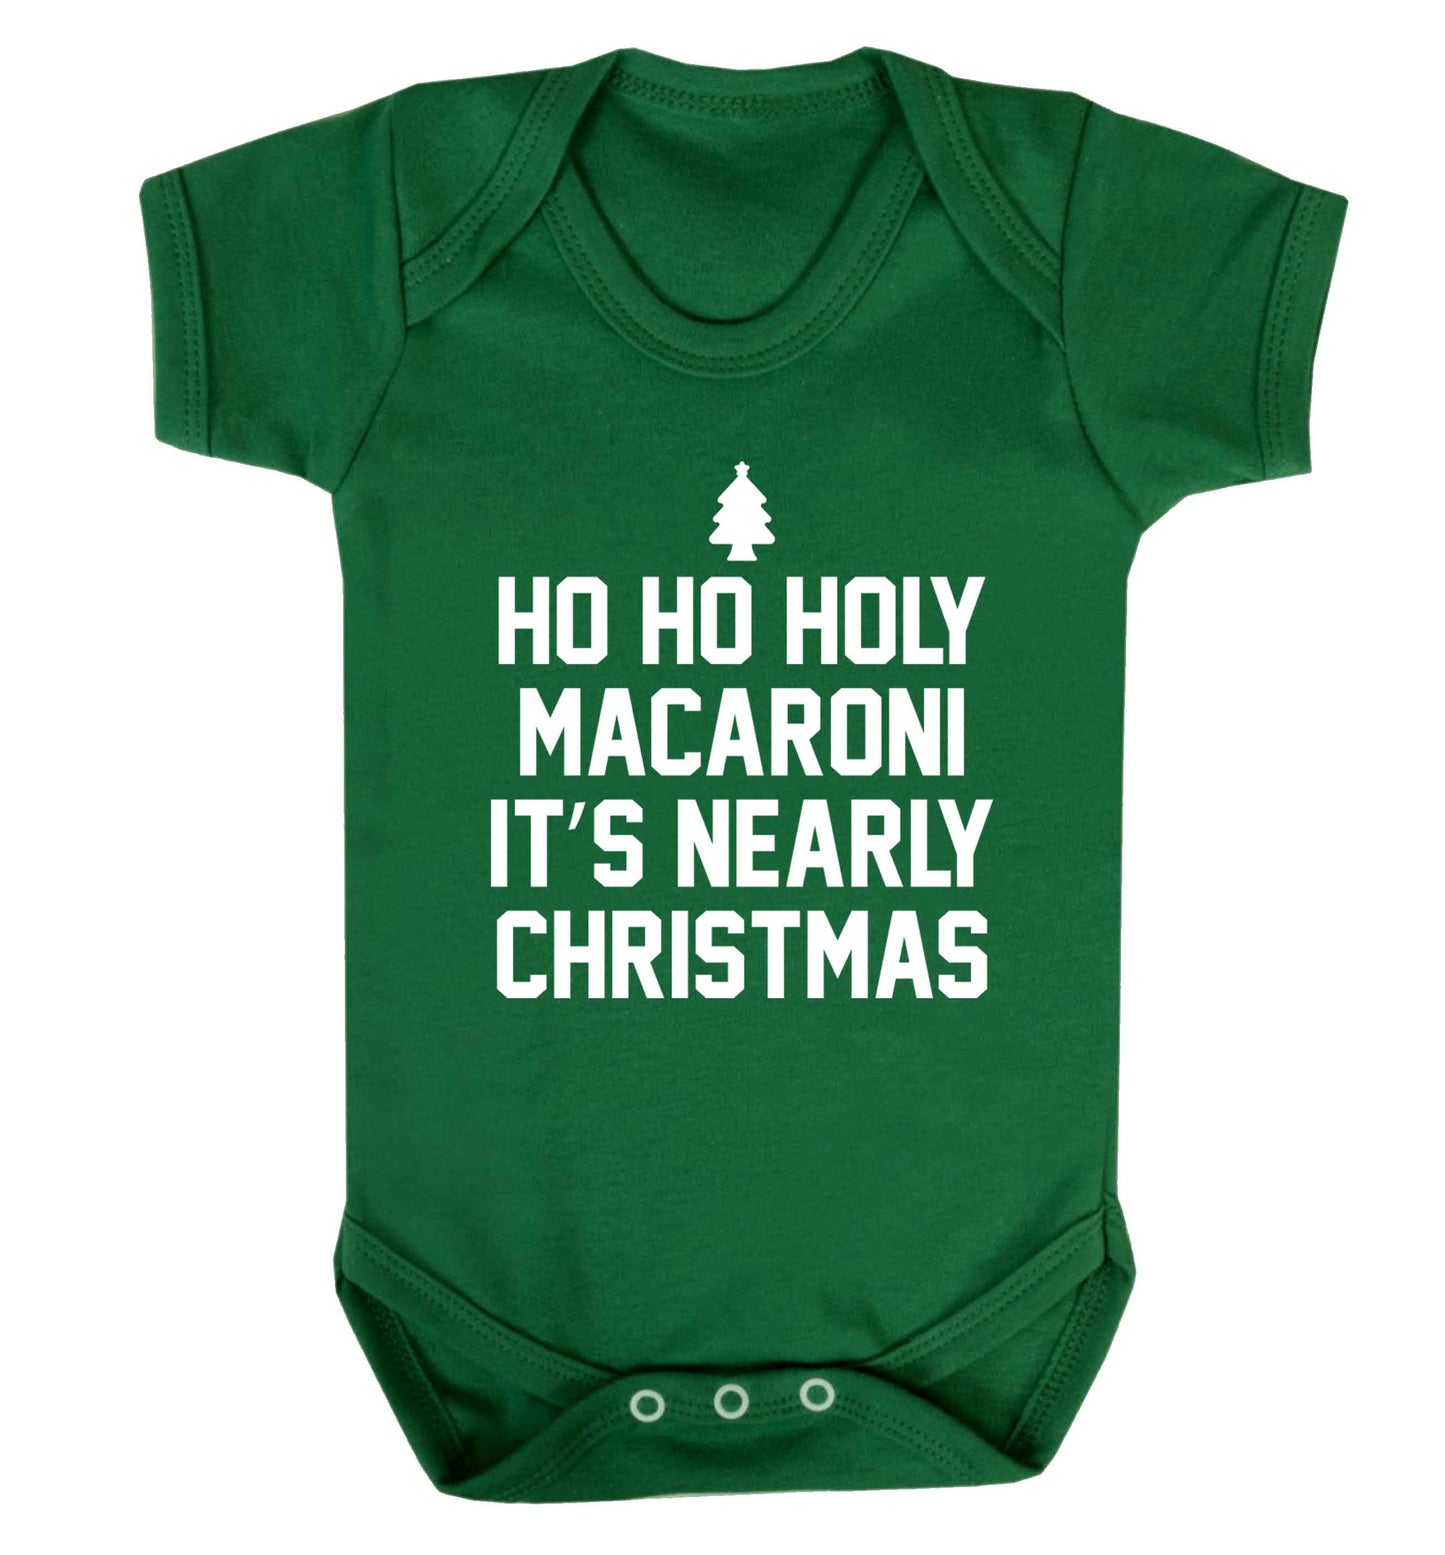 Ho ho holy macaroni it's nearly Christmas Baby Vest green 18-24 months